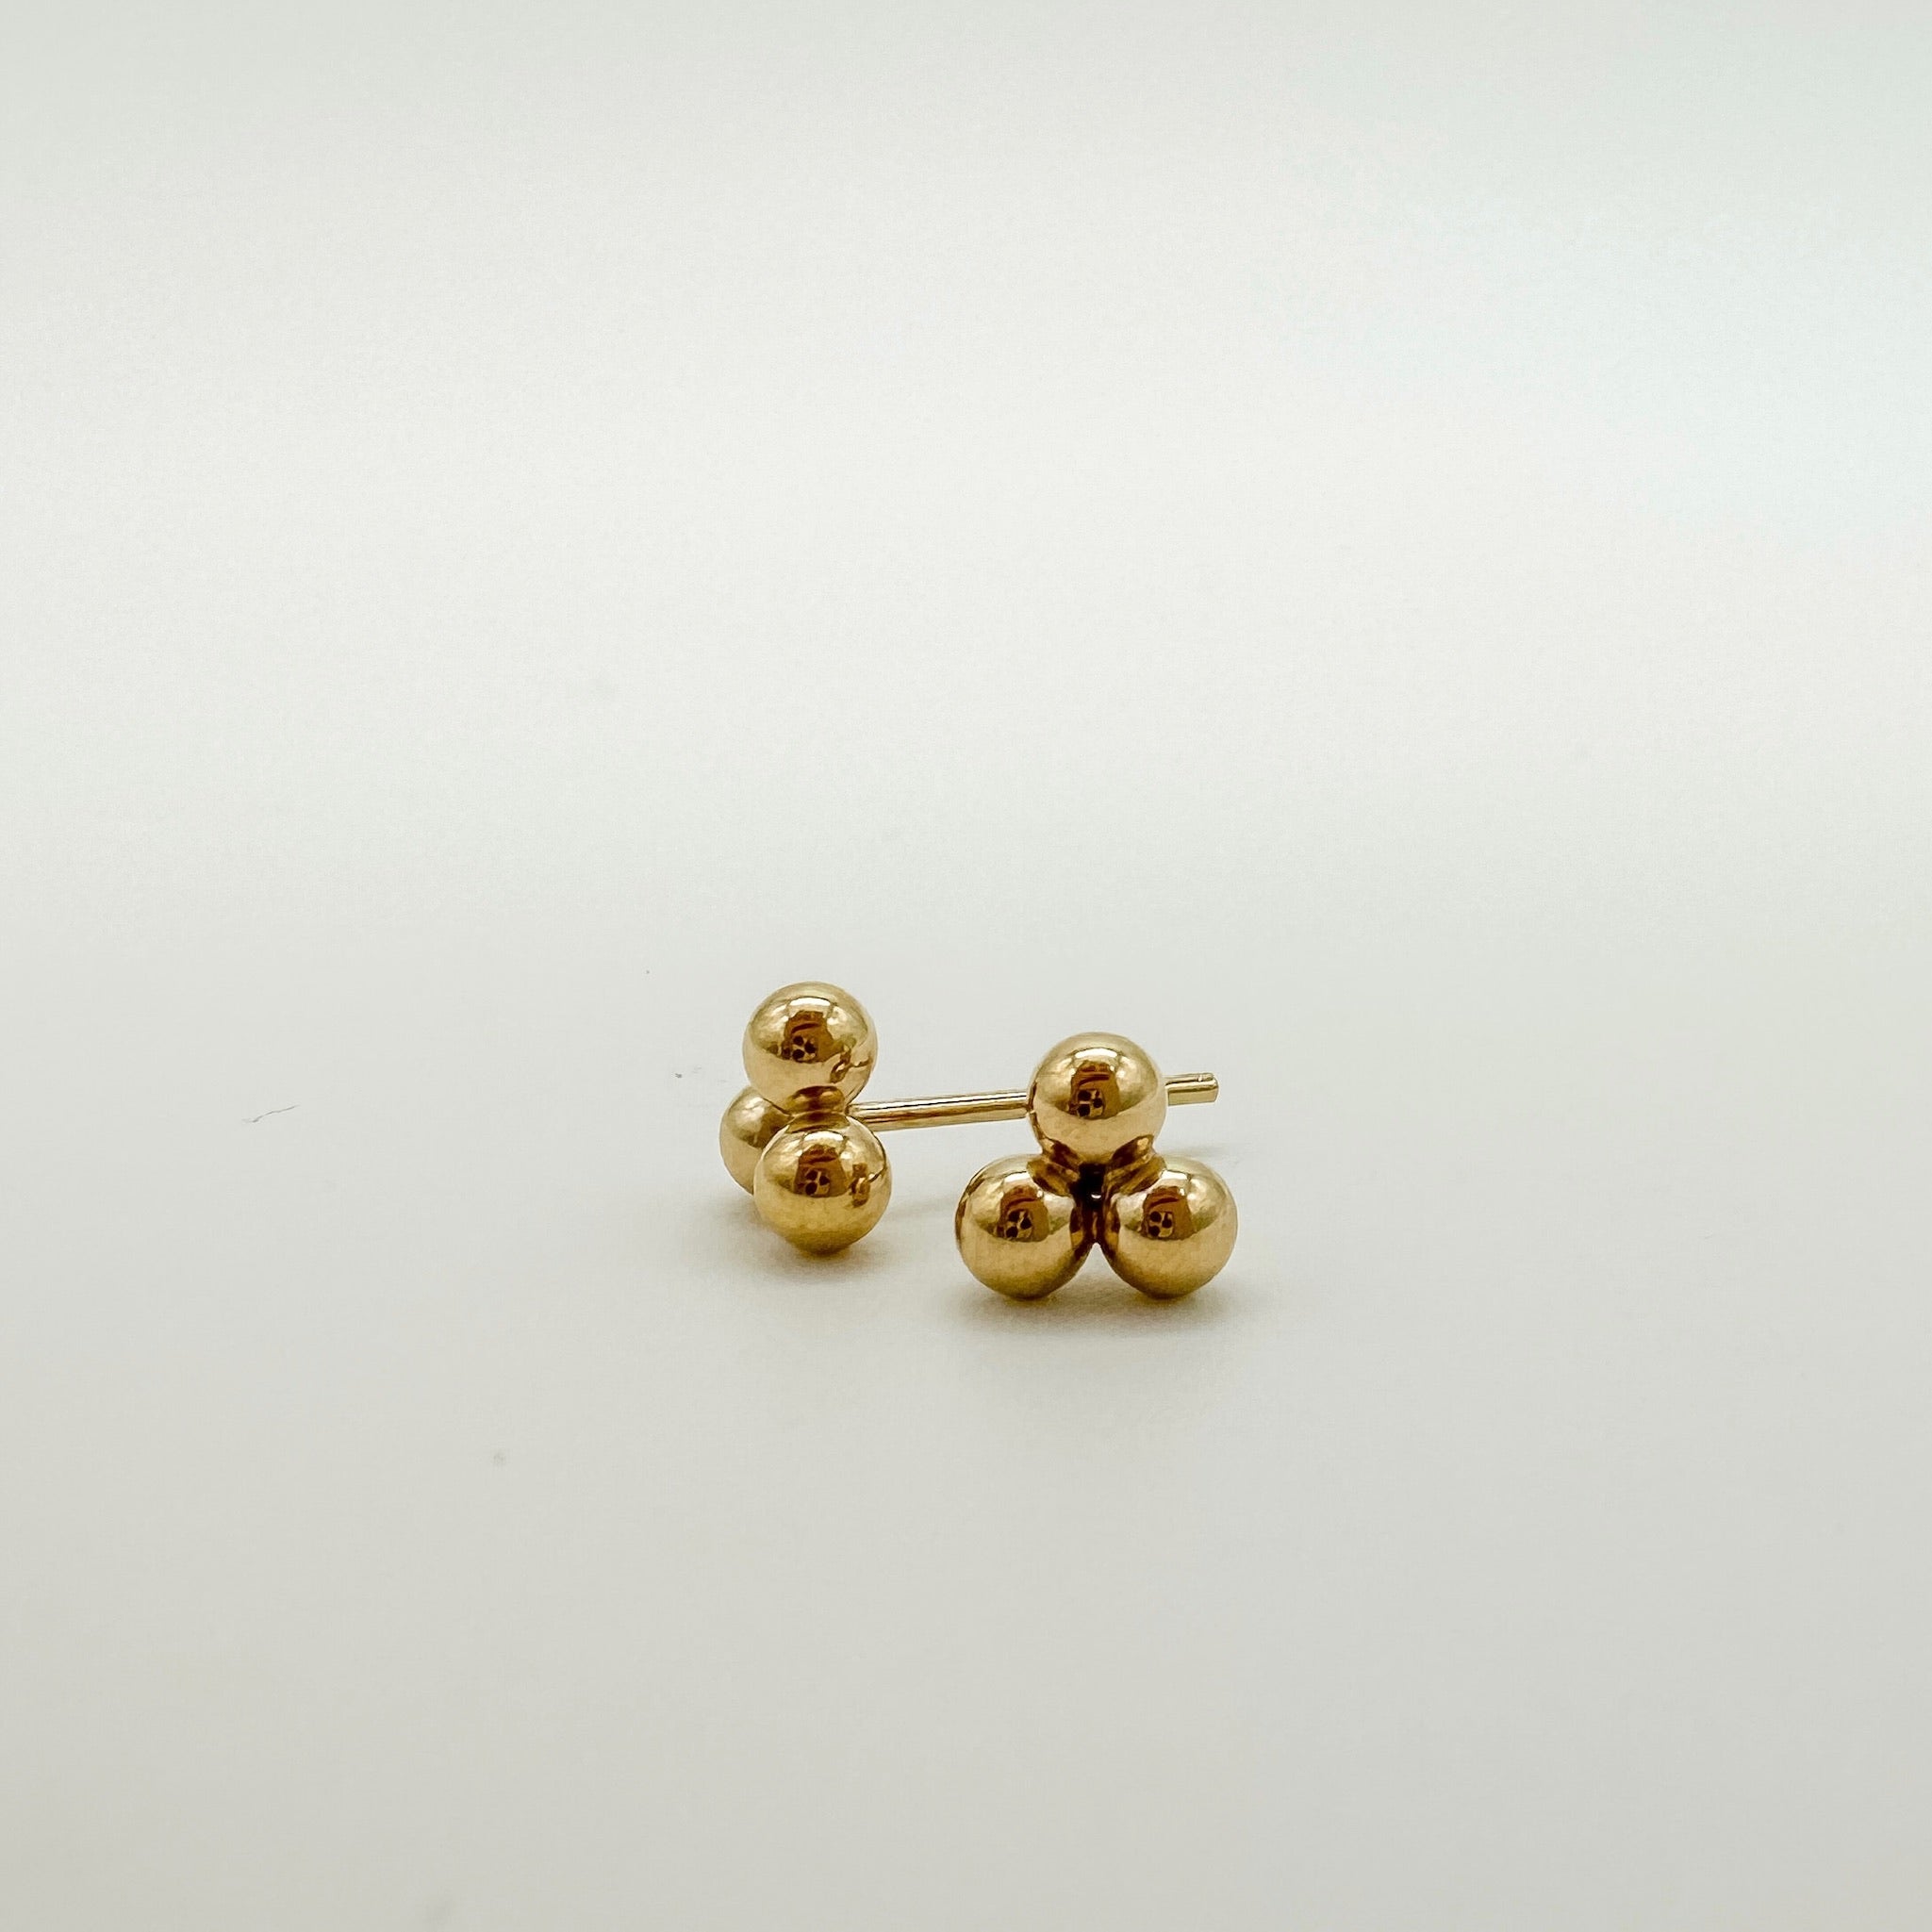 Stud earrings for wholesale jewelry business